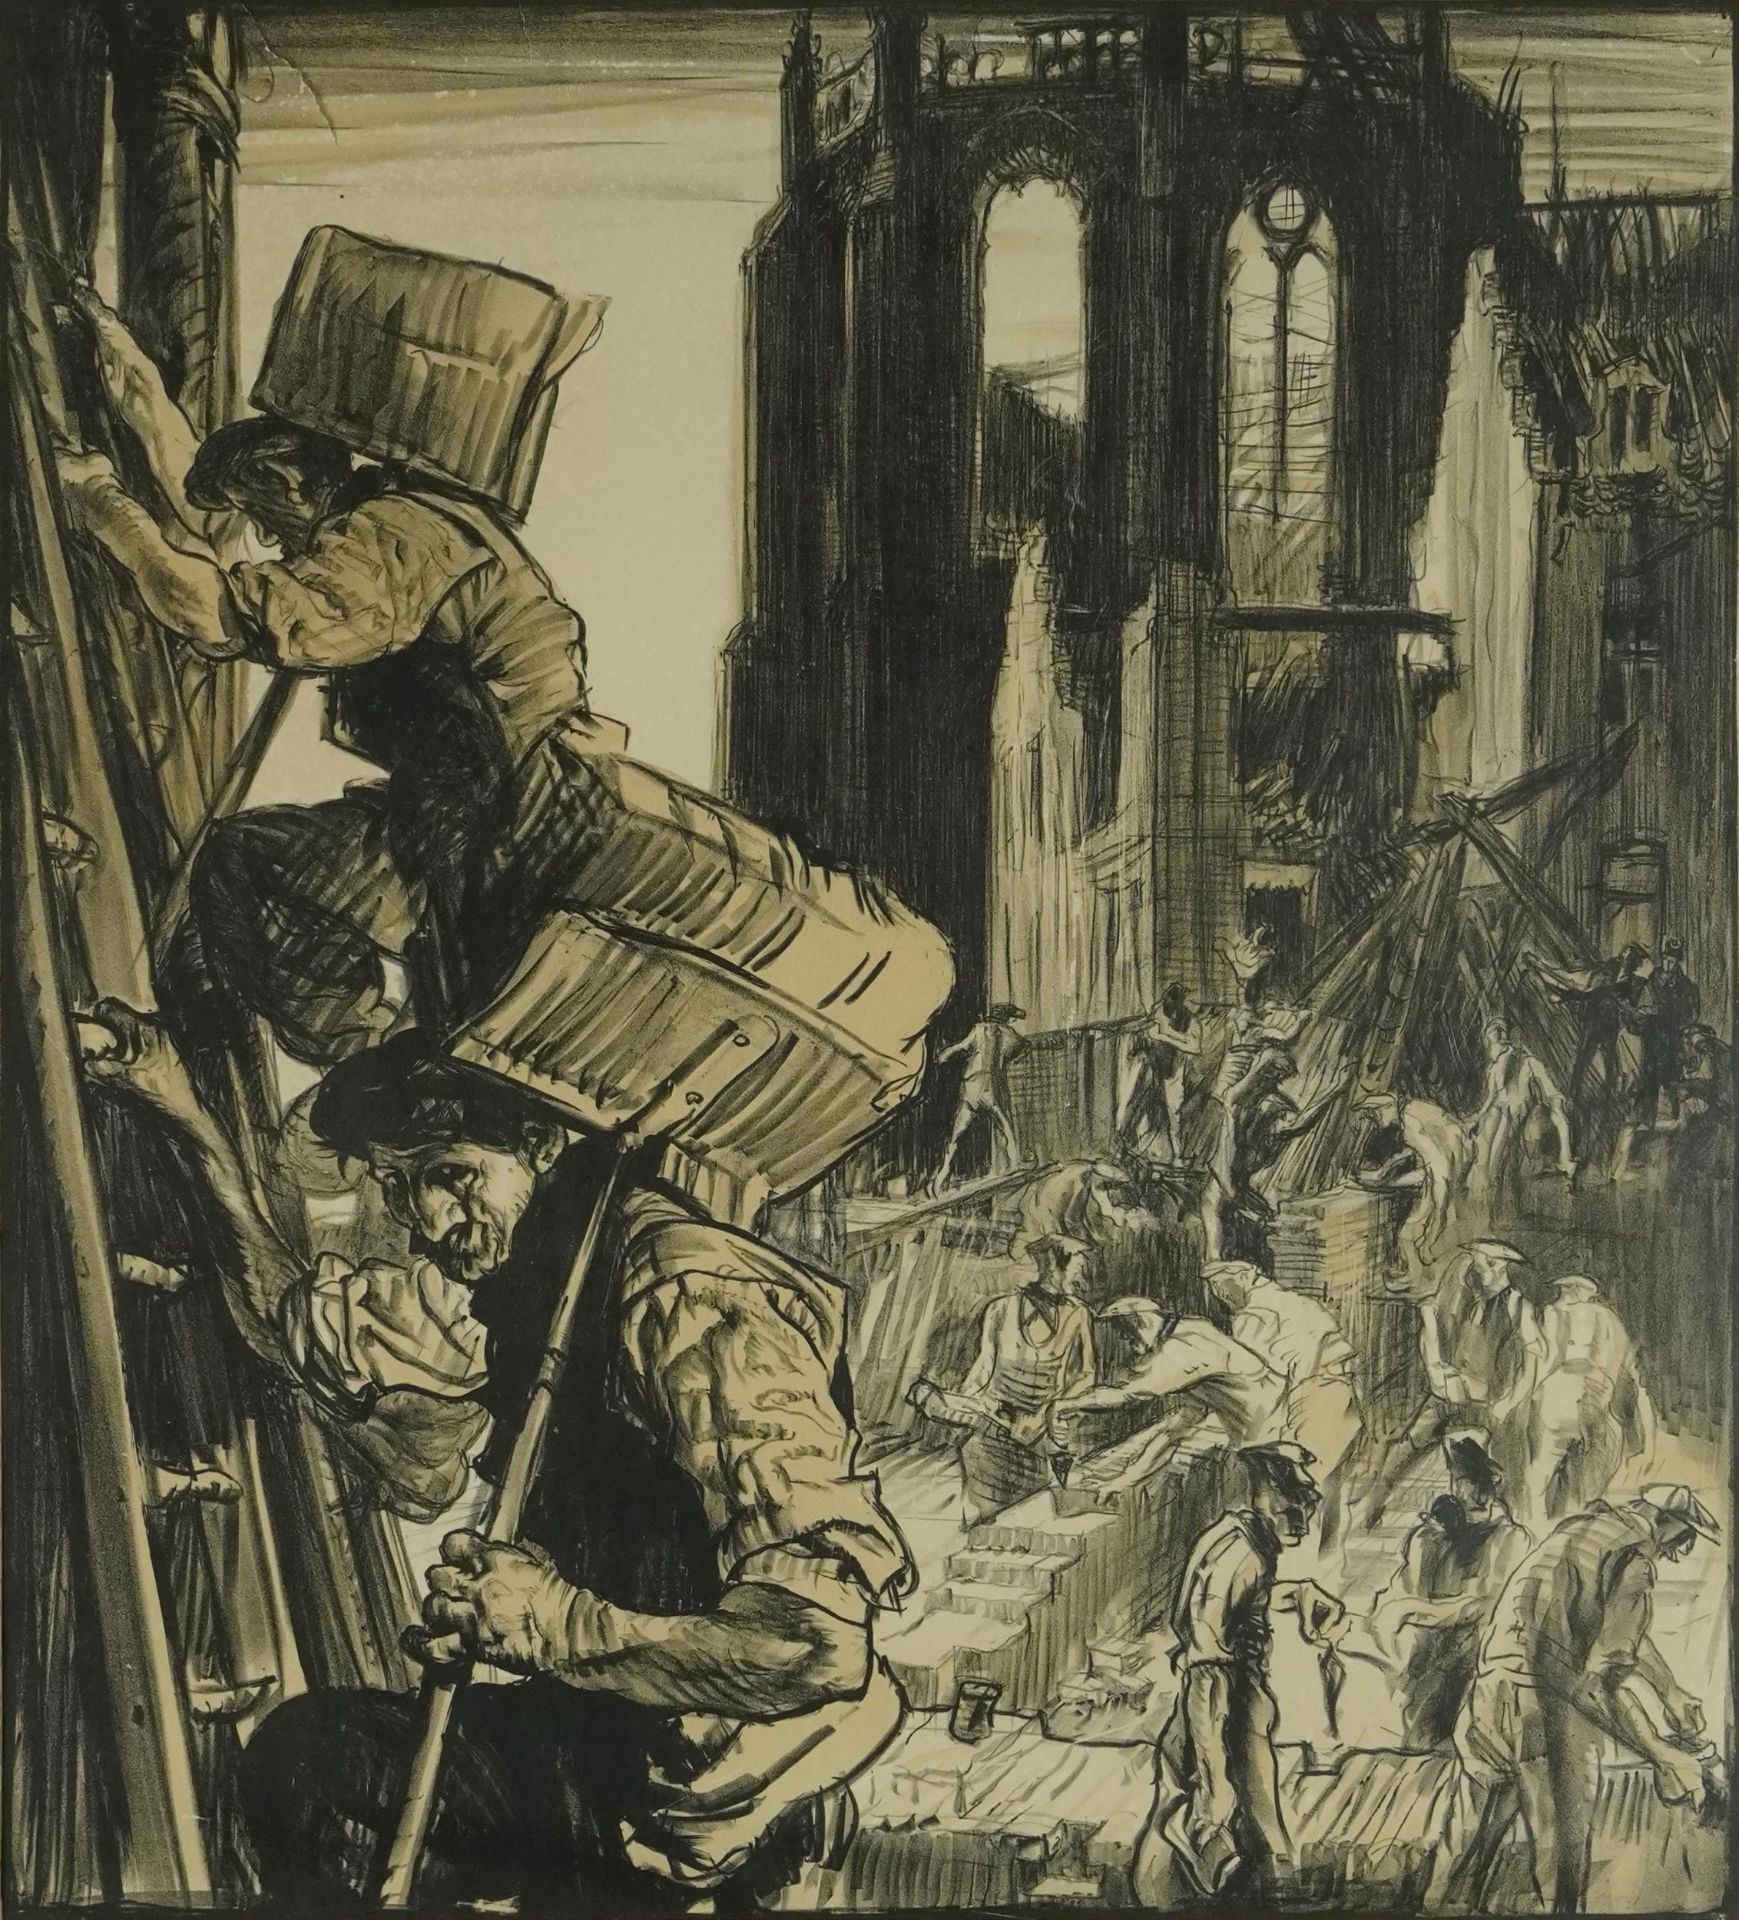 Sir Frank Brangwyn RA PPE - The Remaking of Belgium, charcoal on paper, Charles & Co London label